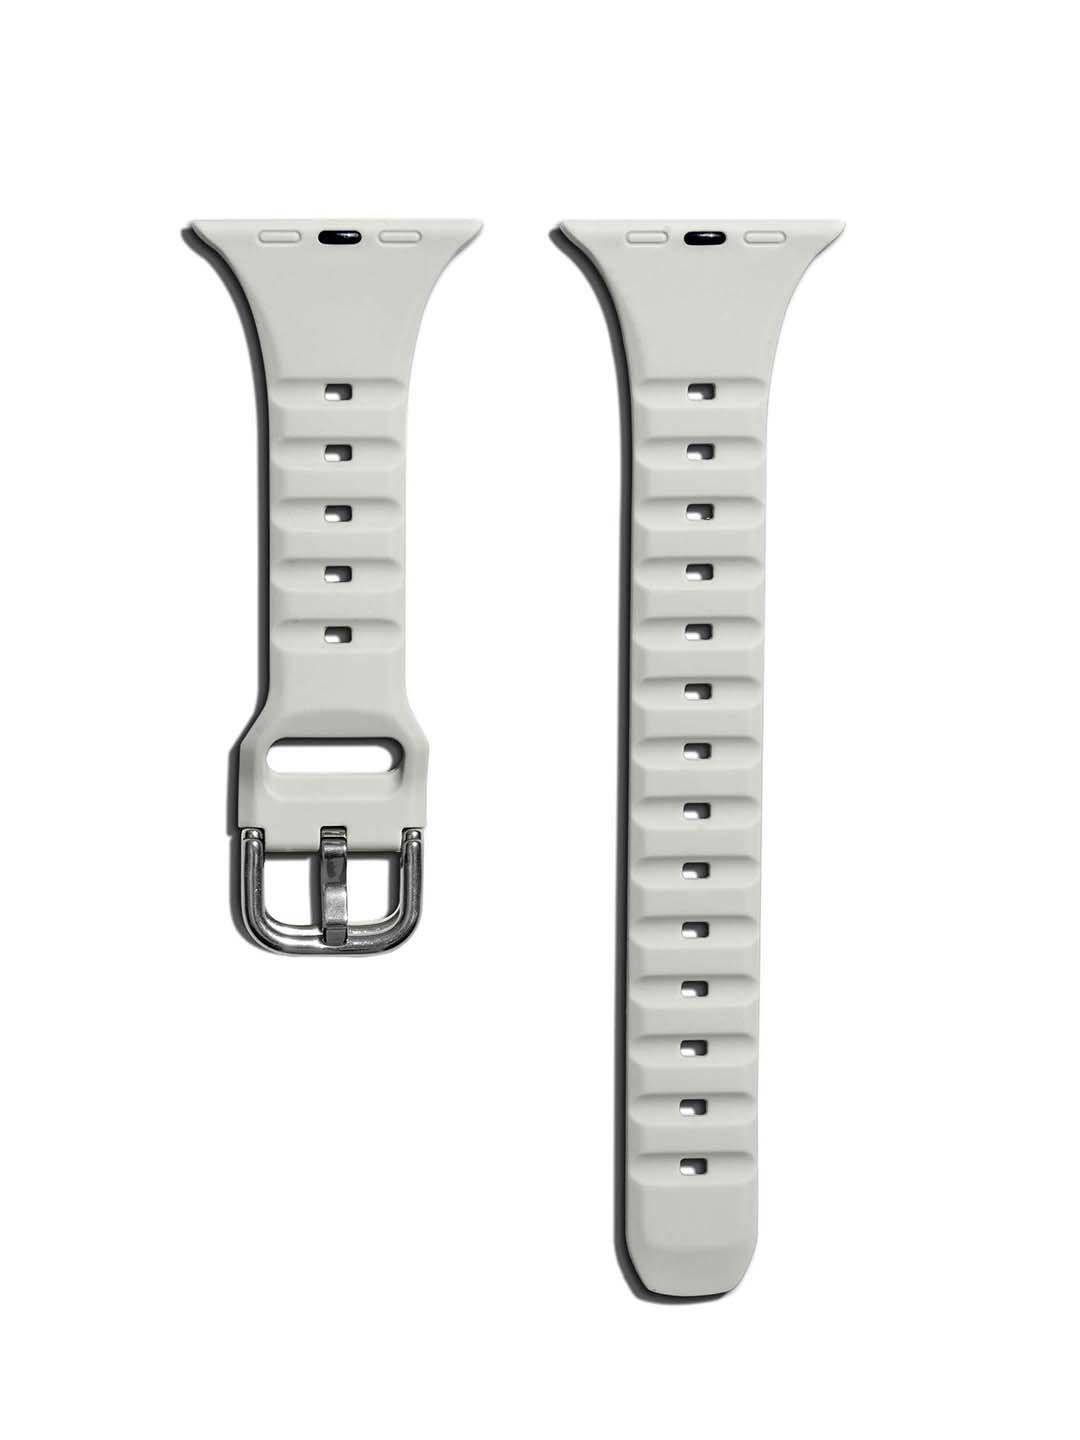 dailyobjects ribbed silicon smart apple watch band straps